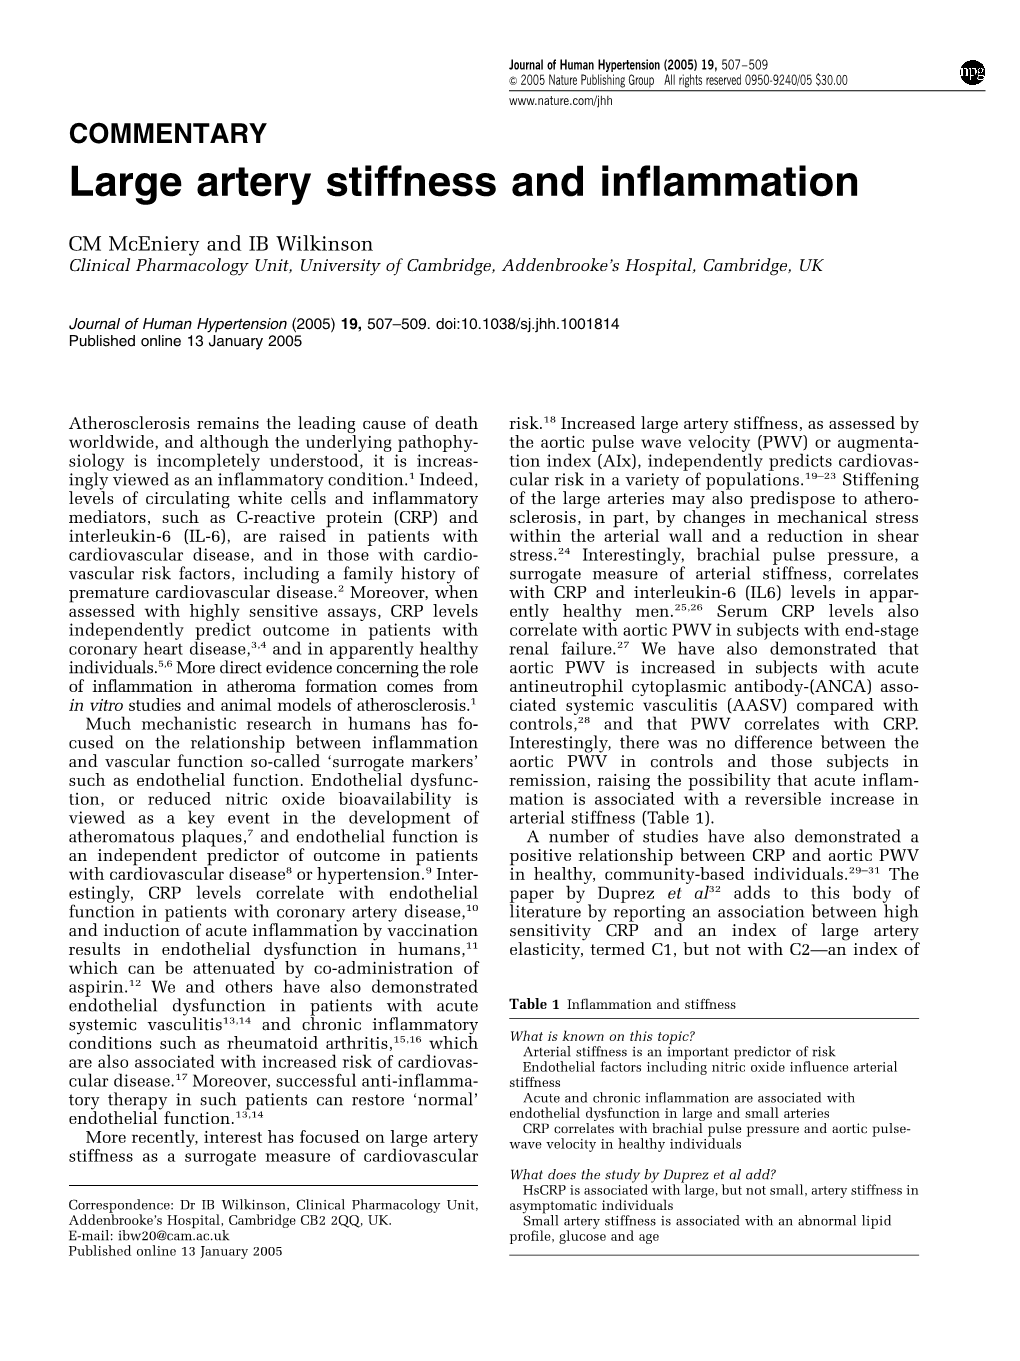 Large Artery Stiffness and Inflammation